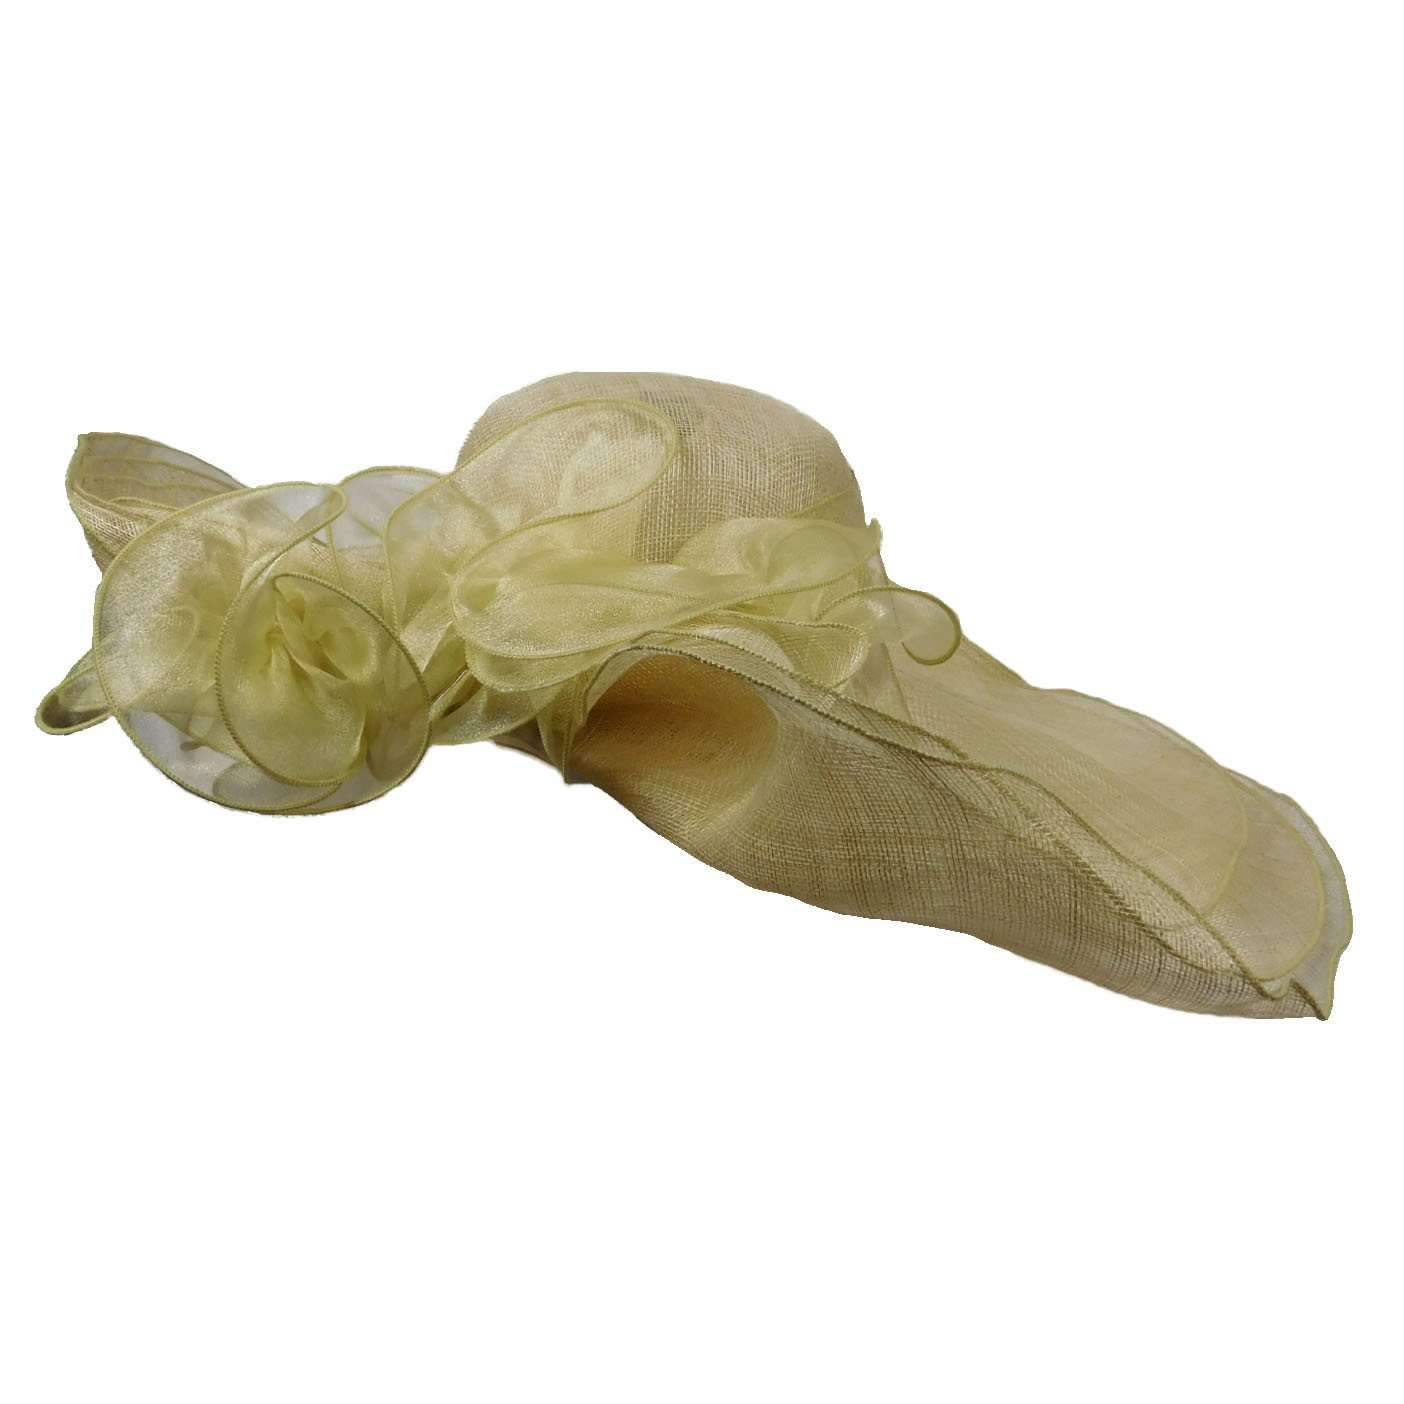 Stunning Sinamay Derby Hat with Sheer Flower Accent Dress Hat Jeanne Simmons js6448NT Natural  